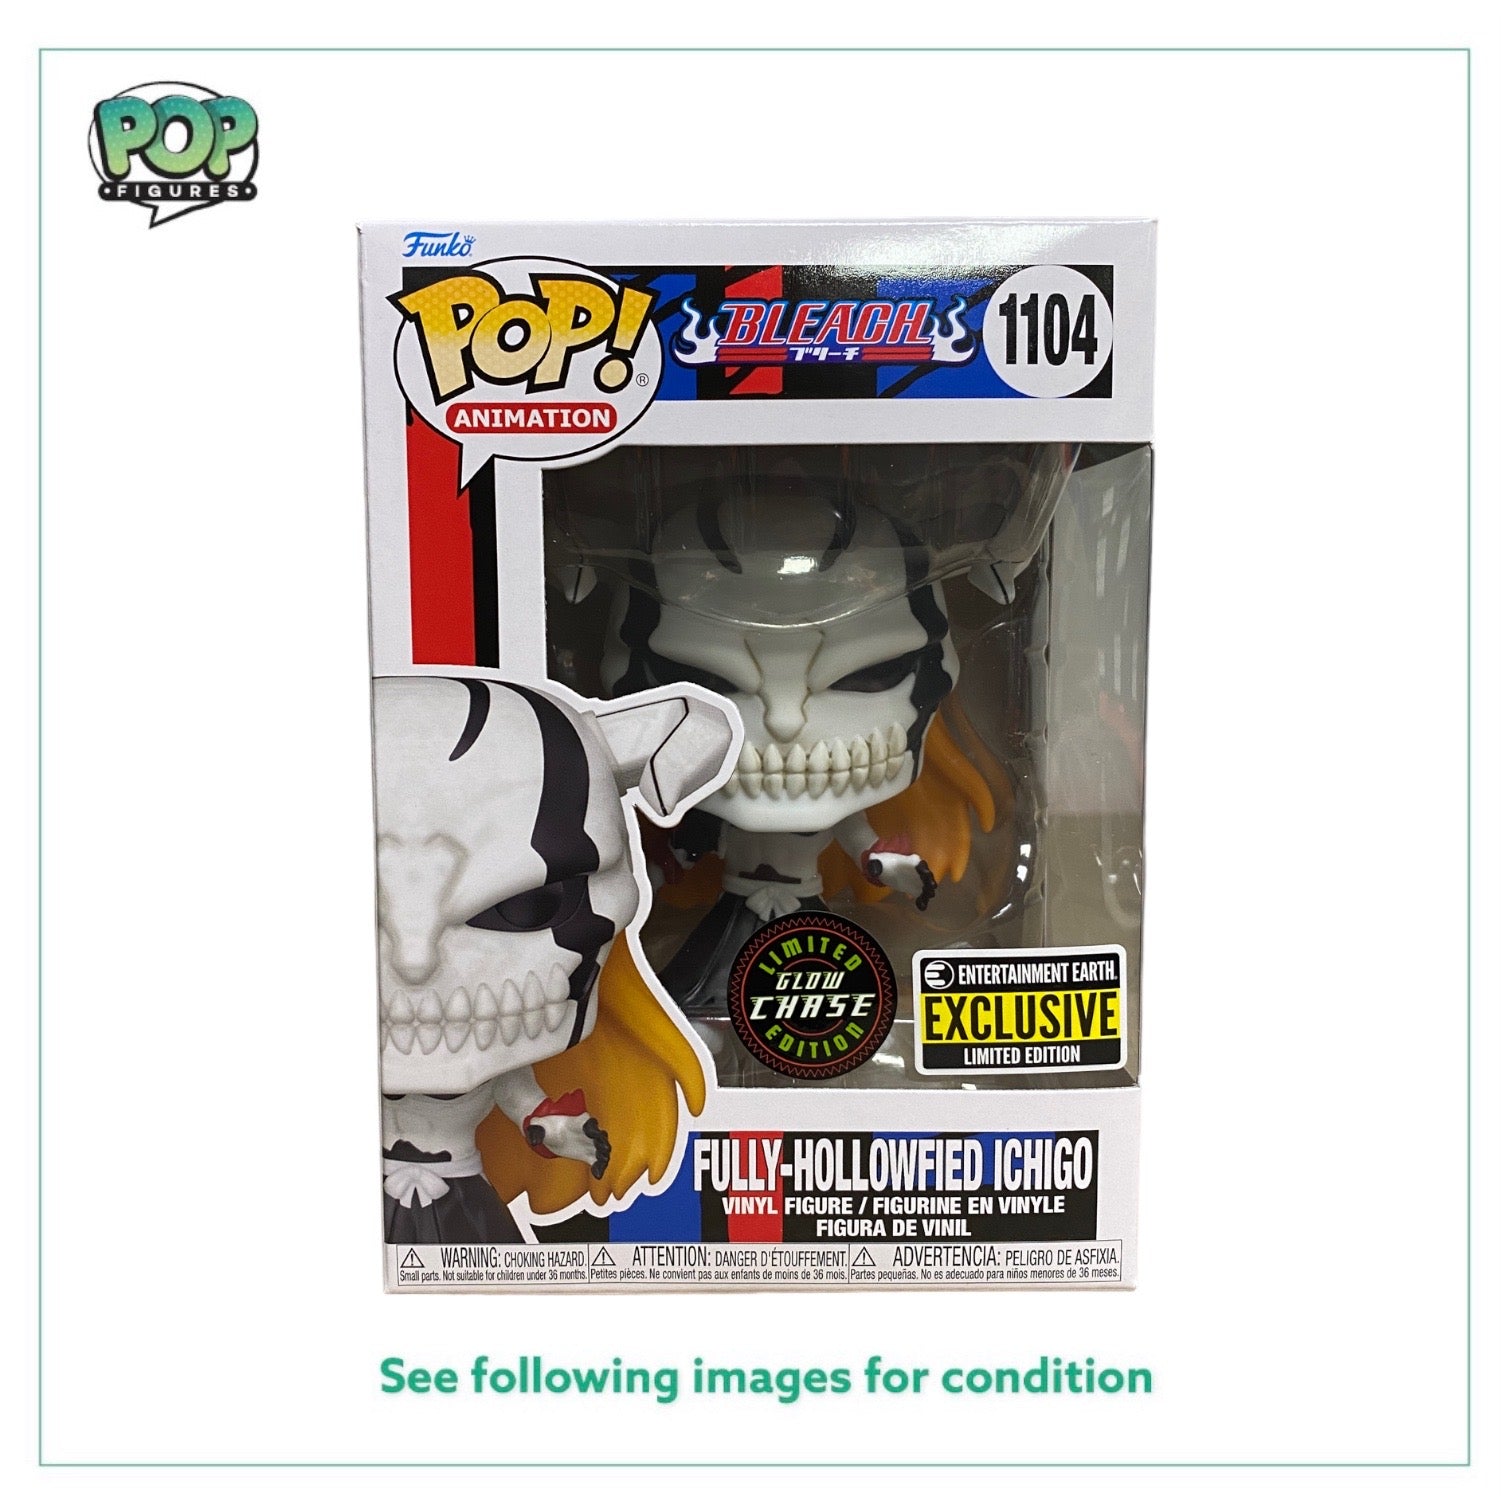 Fully-Hollowfied Ichigo #1104 (Glow Chase) Funko Pop! - Bleach - Entertainment Earth Exclusive - Condition 8.75/10